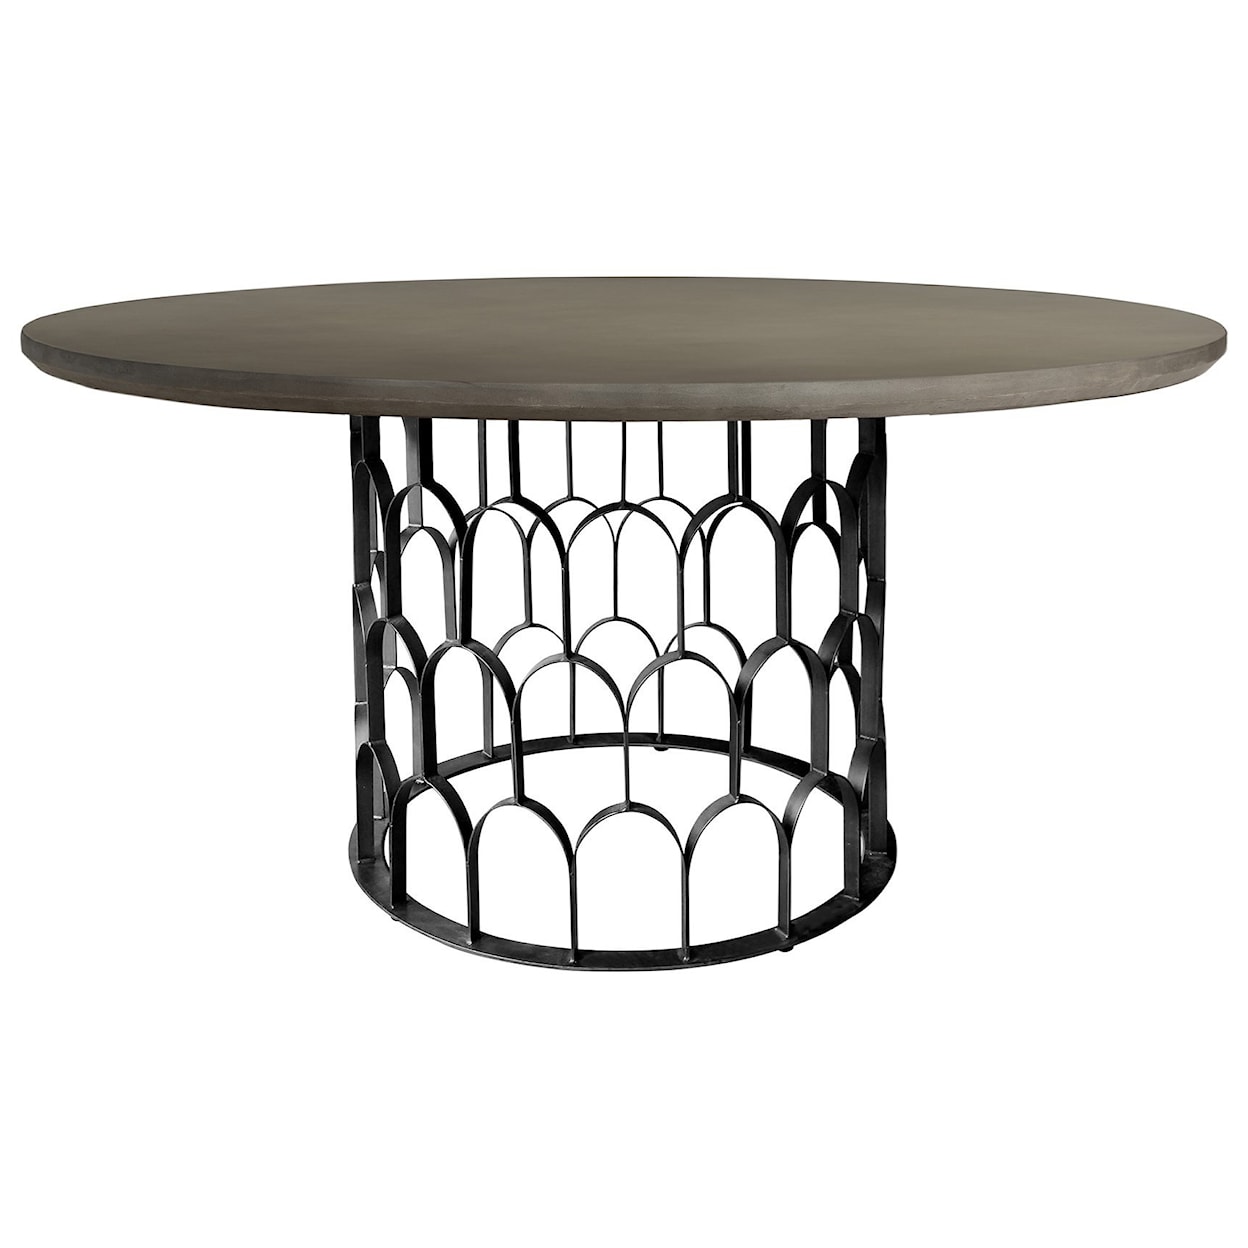 Armen Living Gatsby Concrete and Metal Round Dining Table